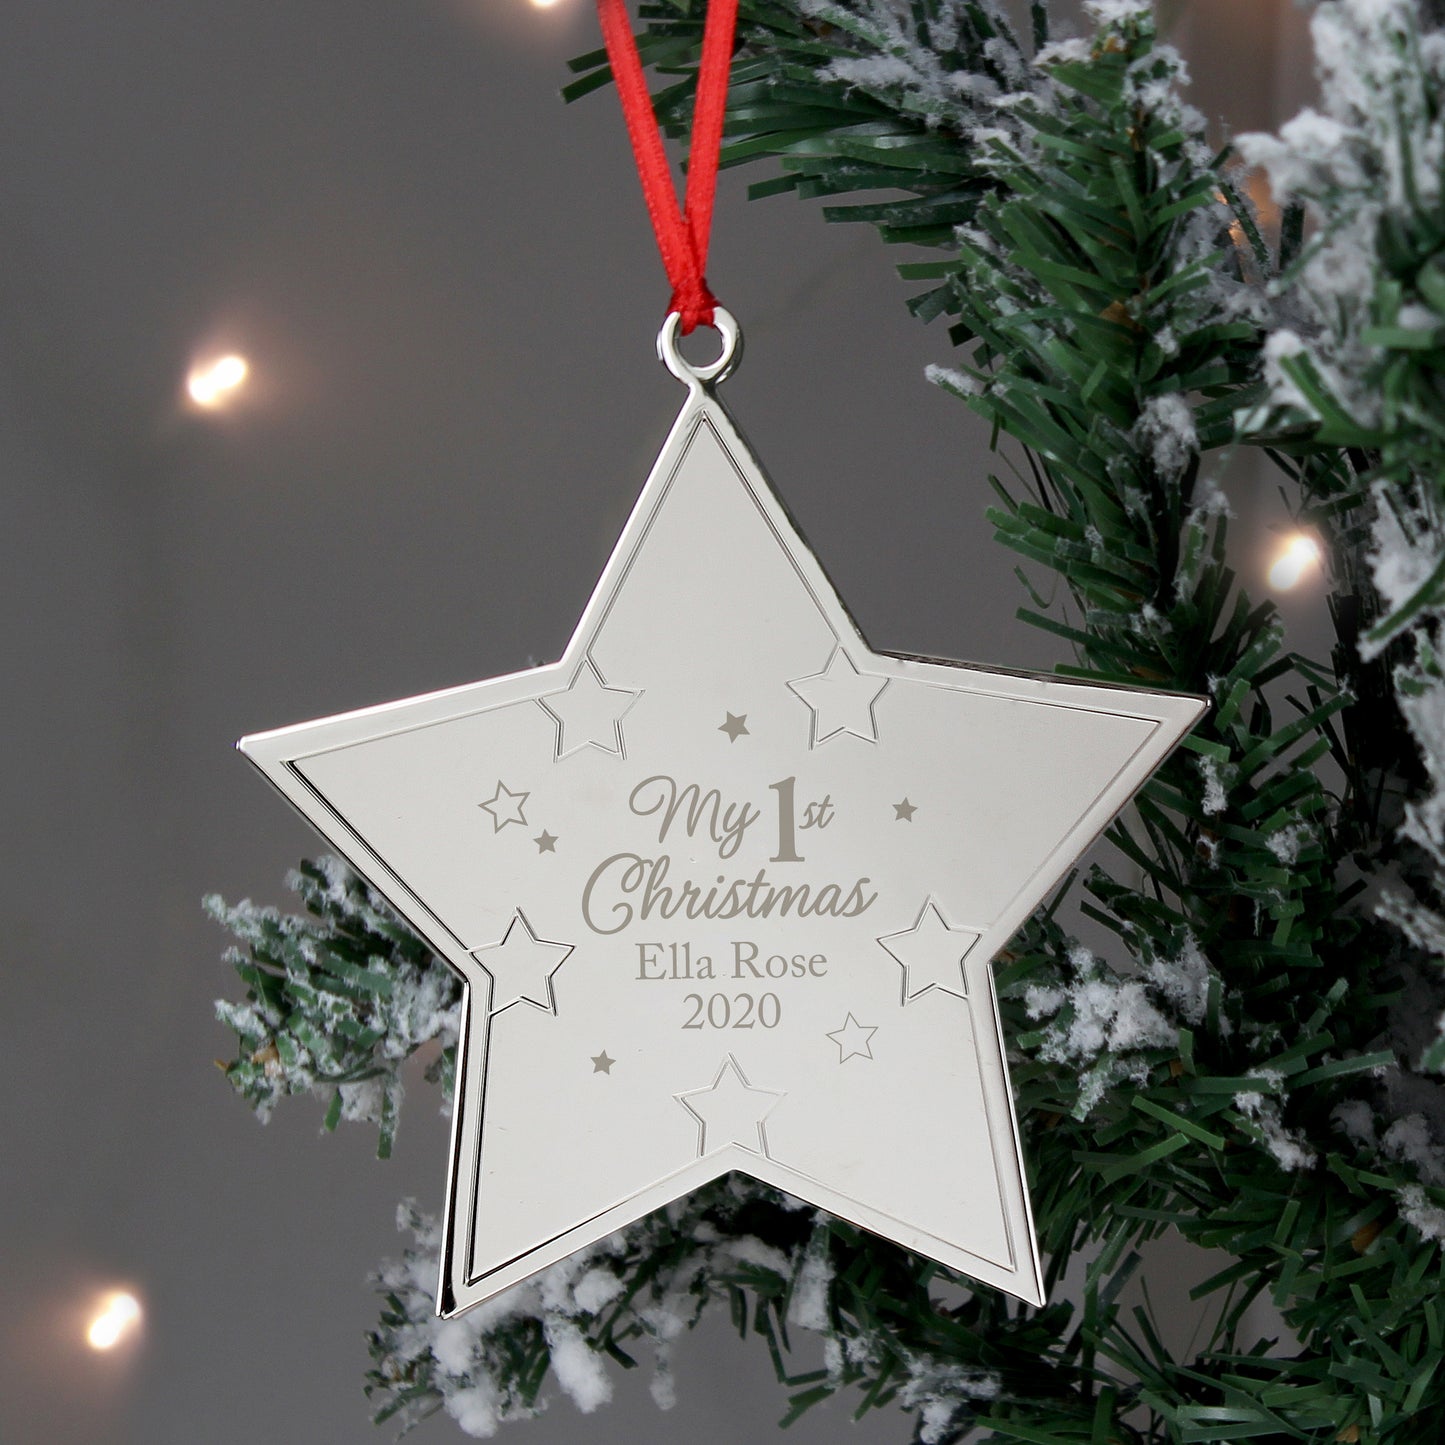 My 1st Christmas star metal decoration - Lilybet loves